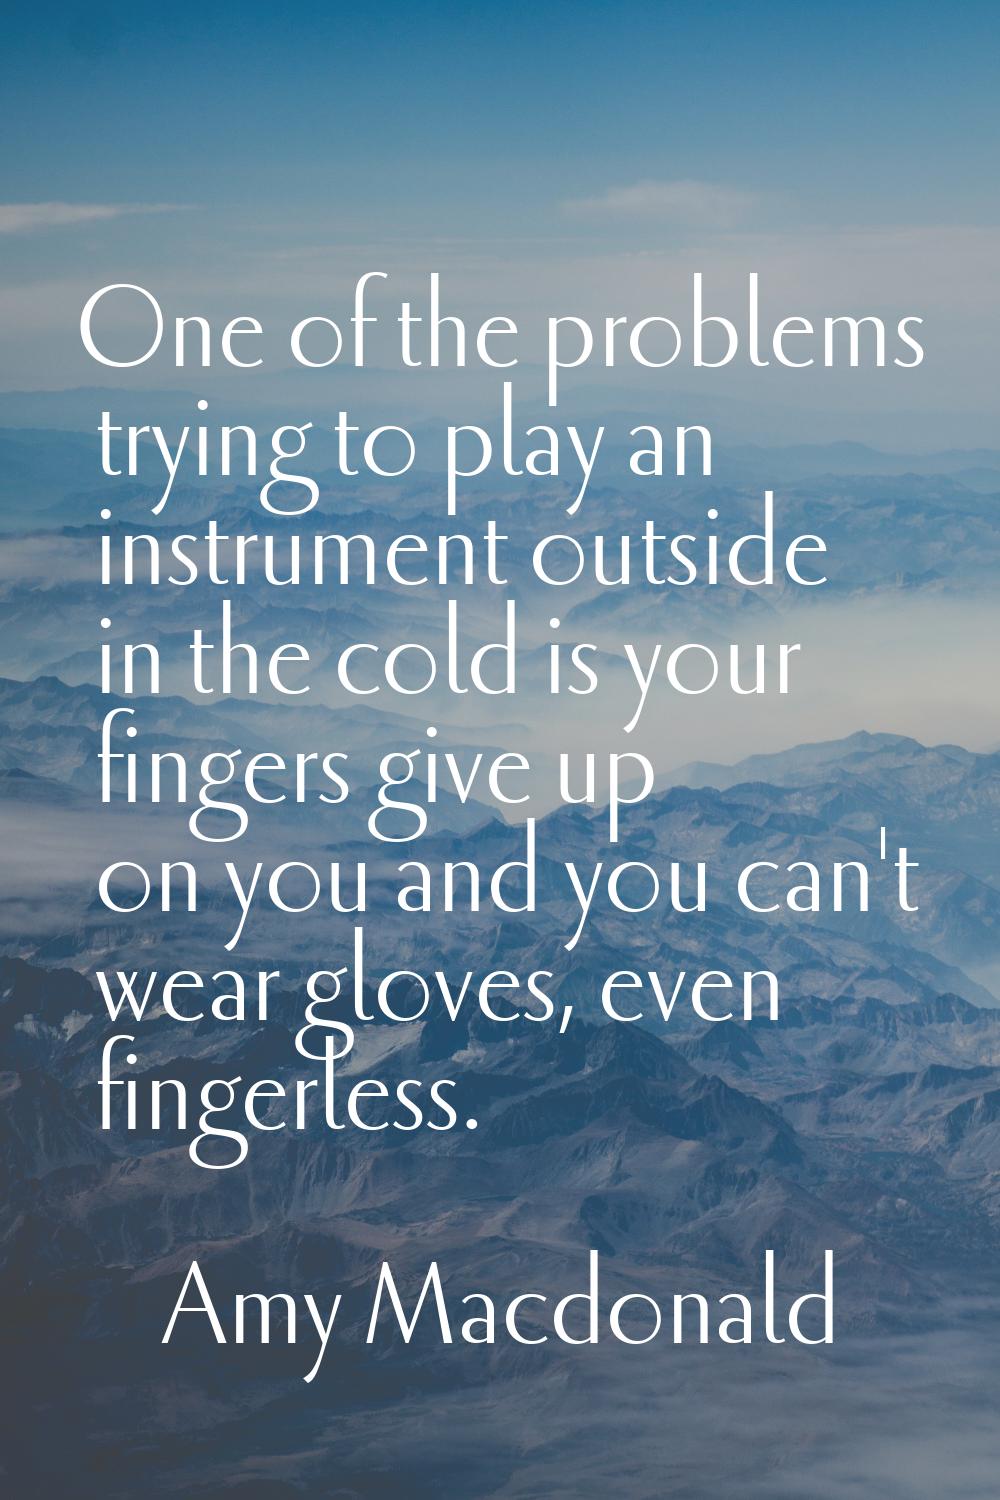 One of the problems trying to play an instrument outside in the cold is your fingers give up on you